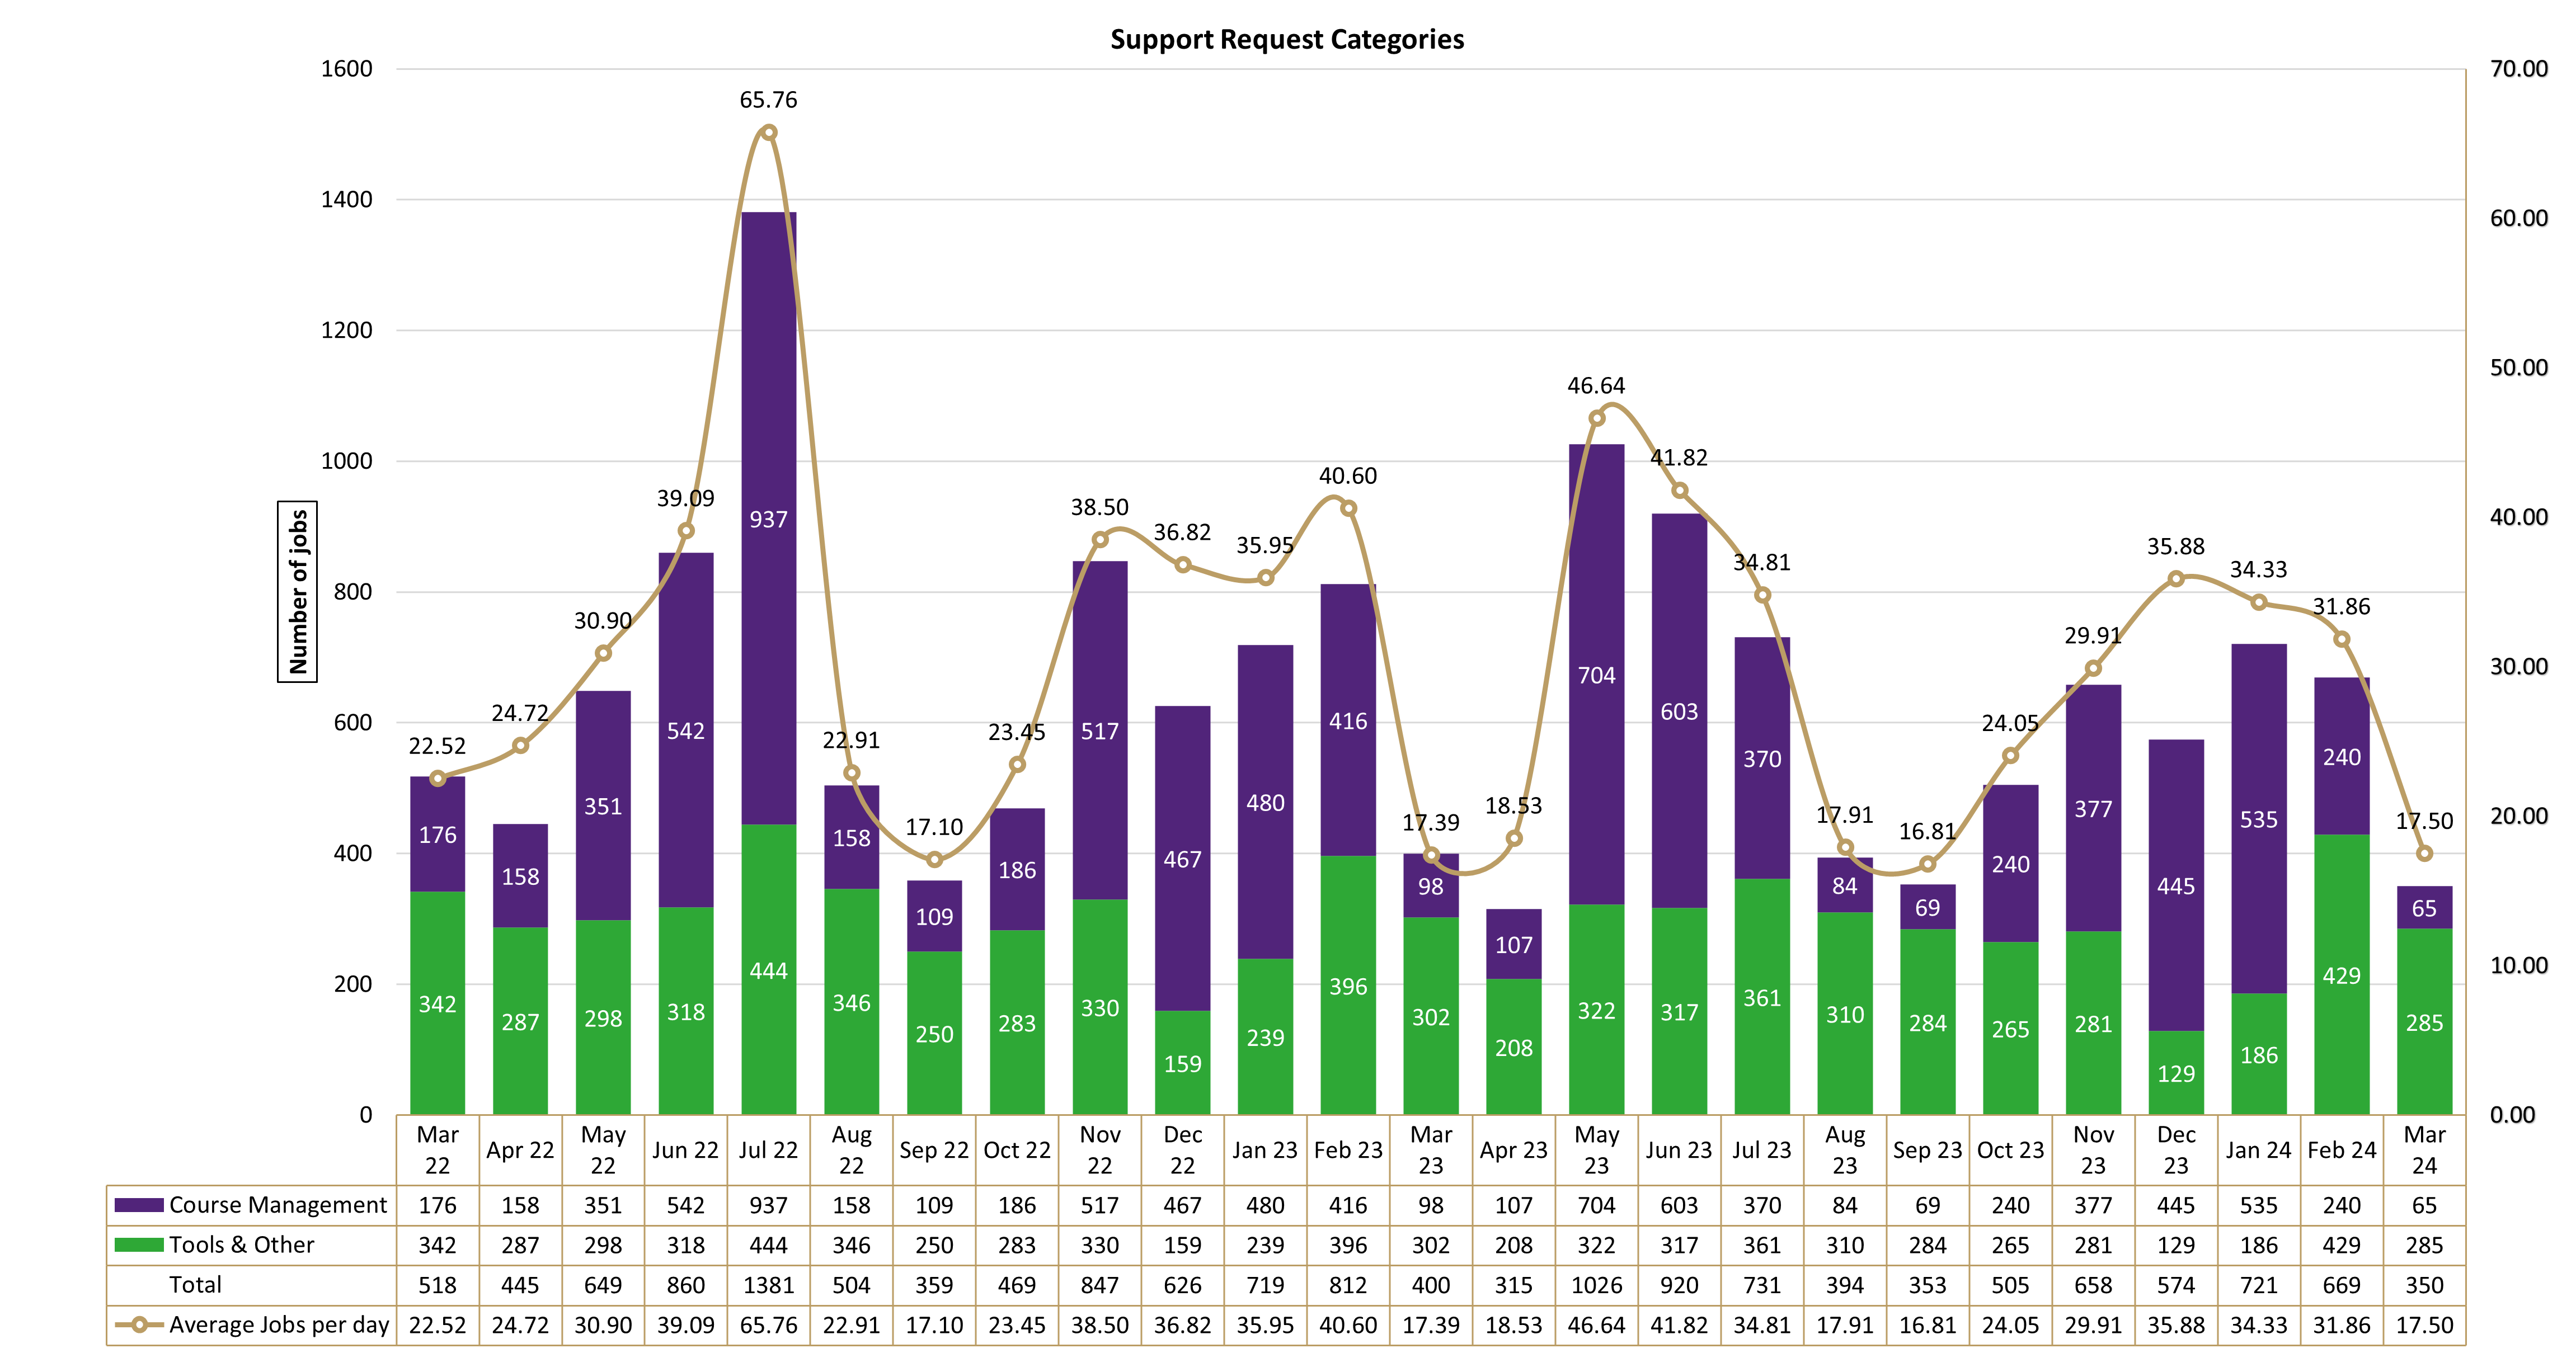 Chart of Support Request Categories from March 2022 to March 2024